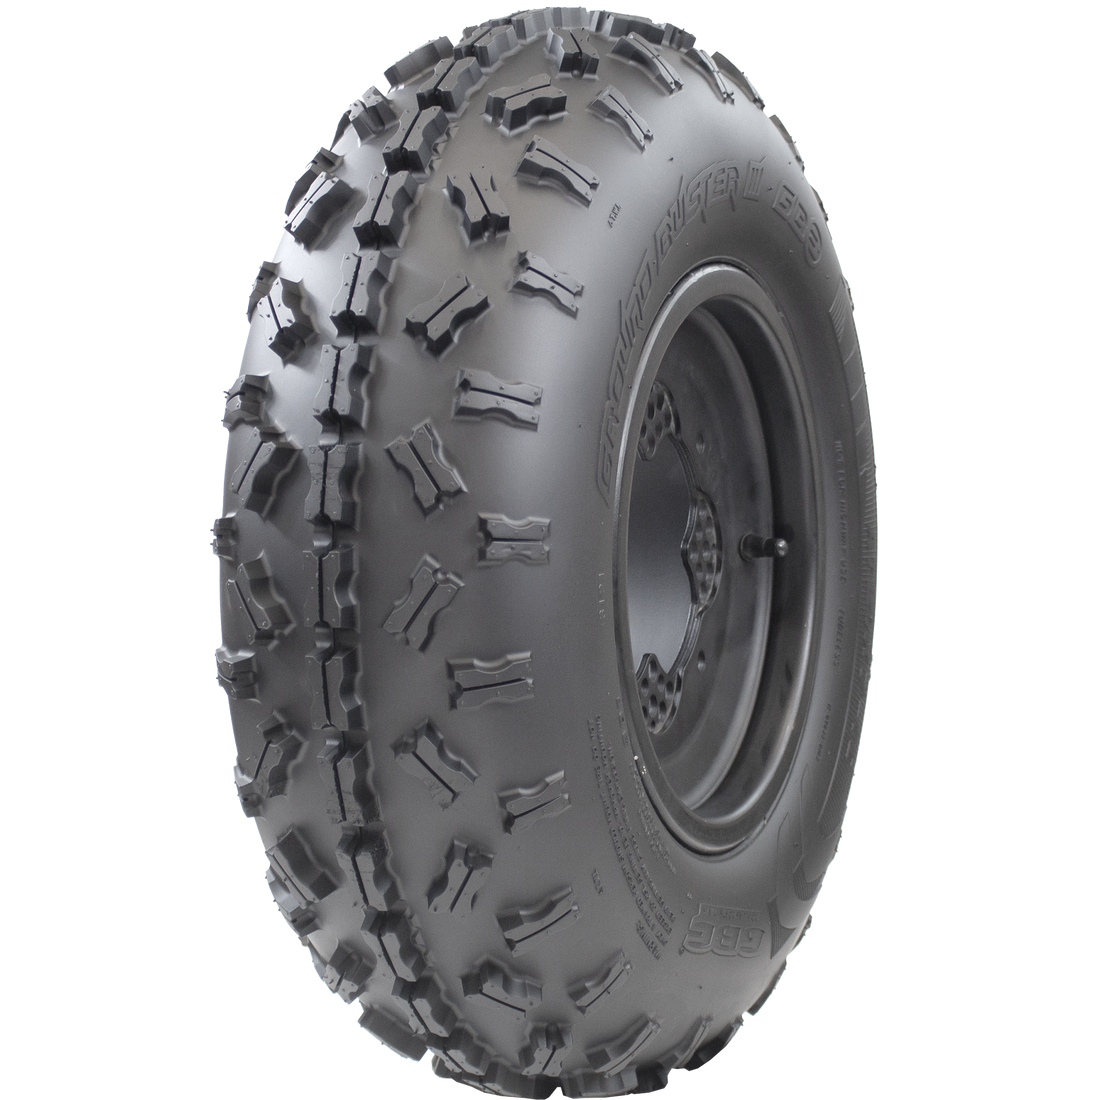 Angle view of Ground Buster III ATV Front tire, displaying the tread, a snippet of the sidewall, and the rim. The image demonstrates the tire's non-directional sipped X-knob tread pattern offering maximum flexibility